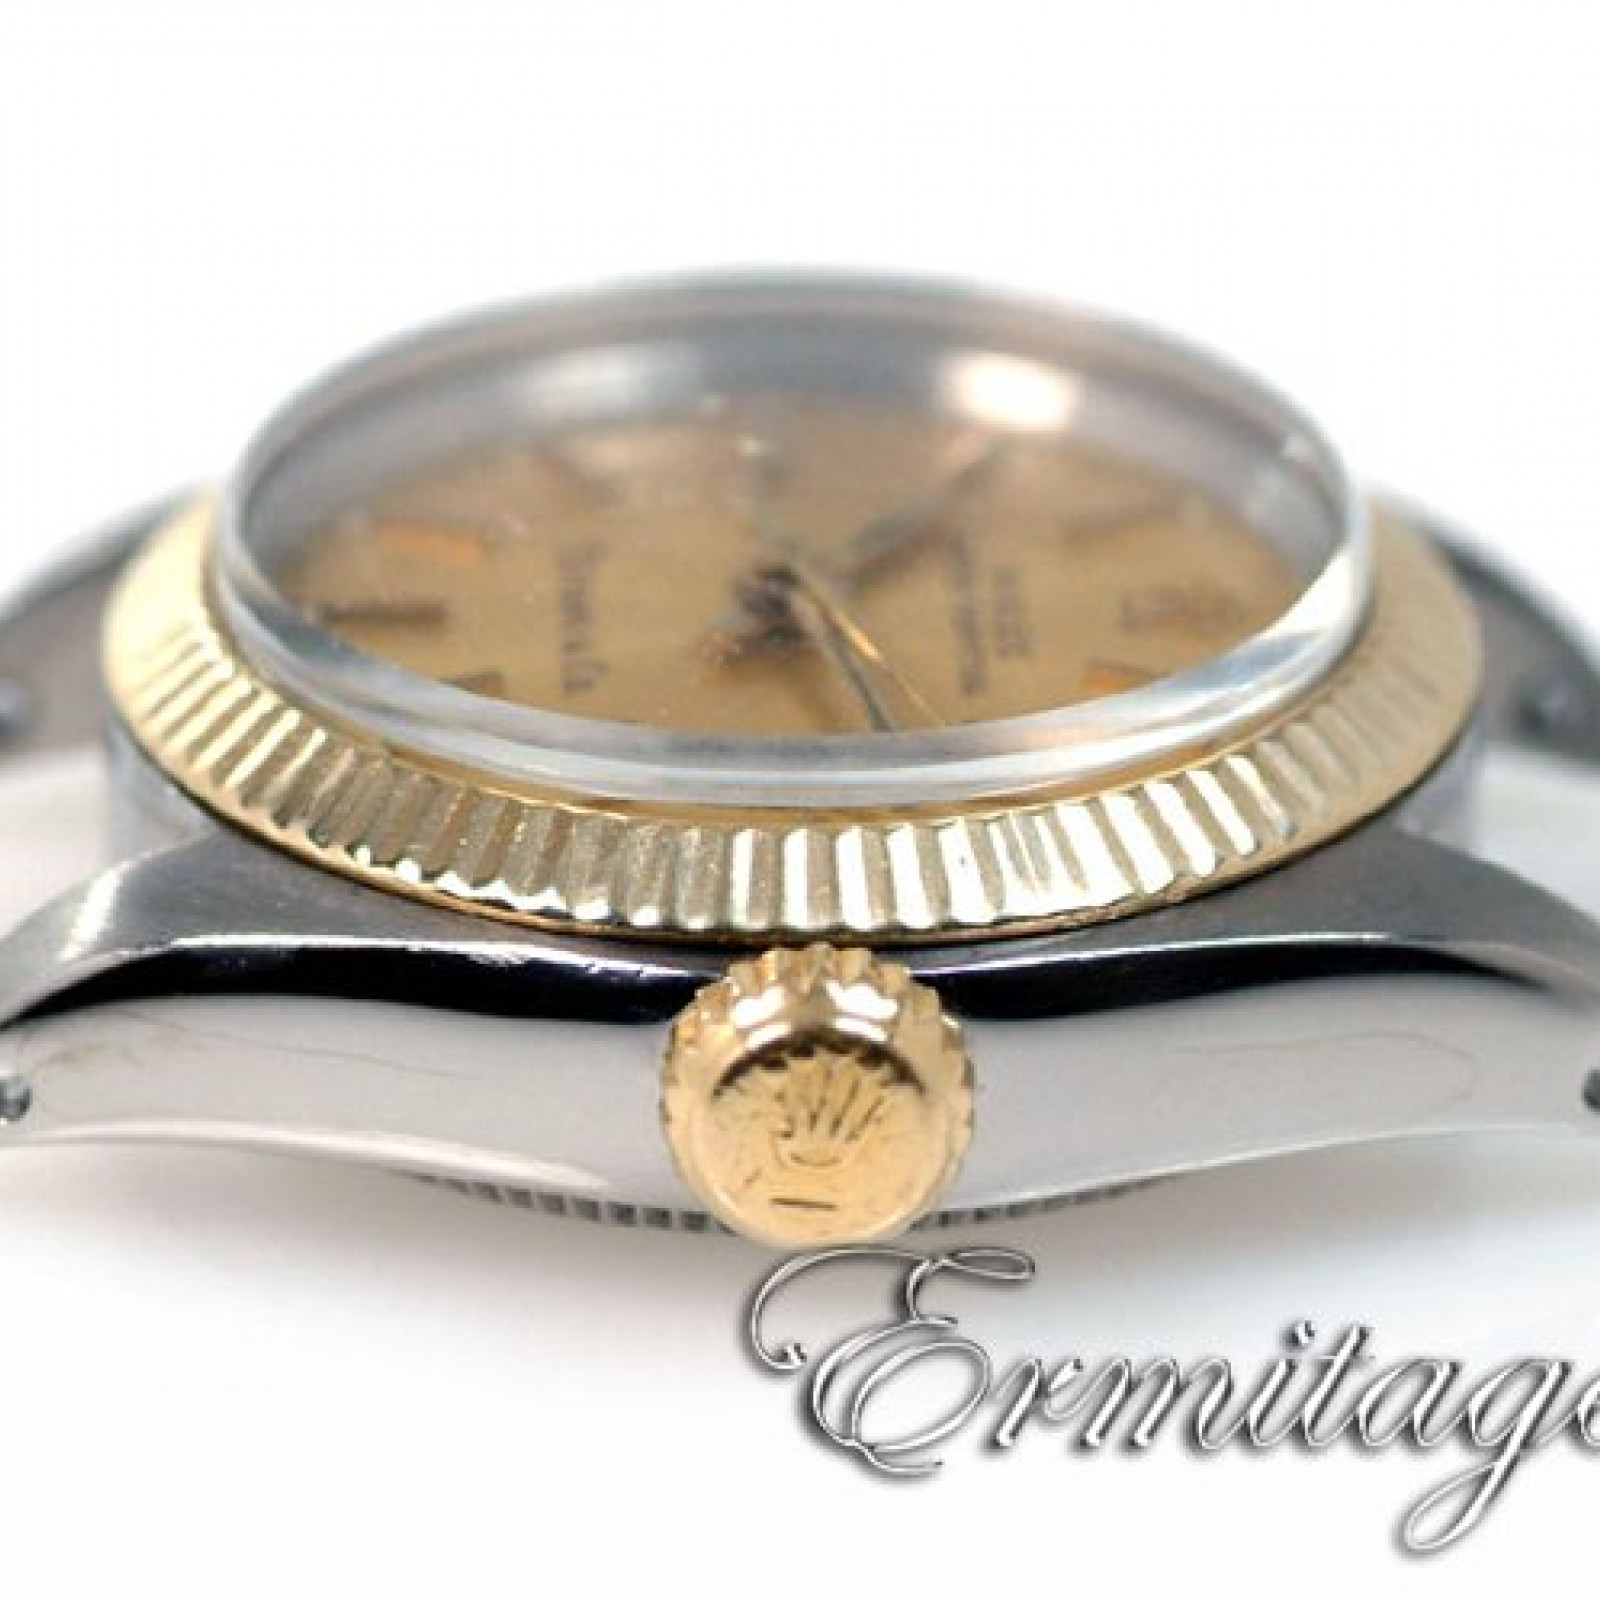 Vintage Rolex Oyster Perpetual 6719 Gold & Steel 1980